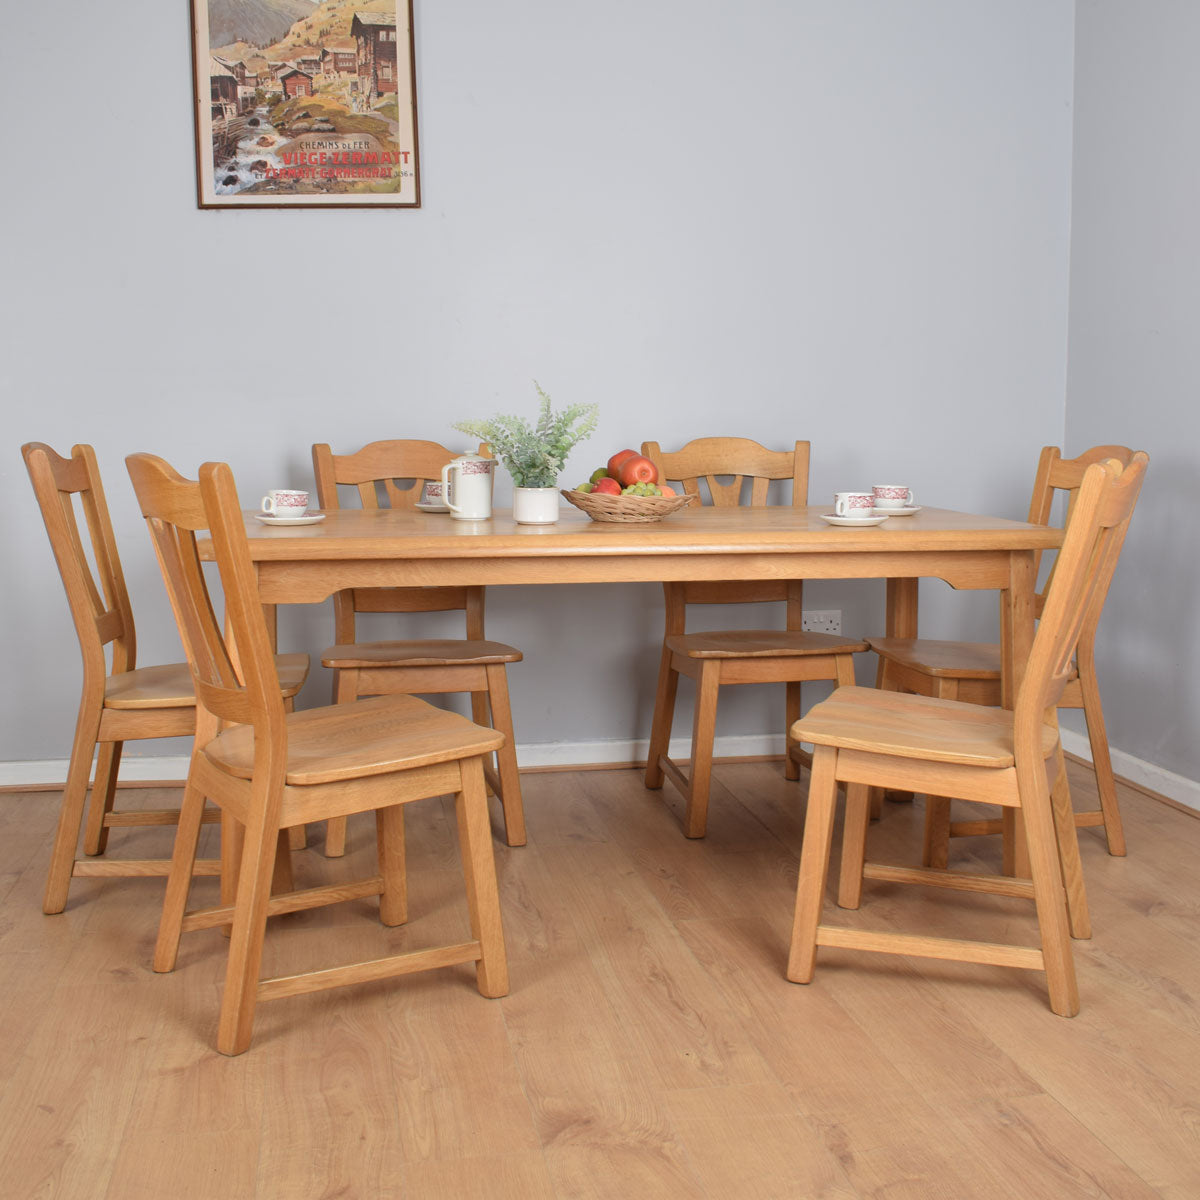 Dutch oak table and six chairs